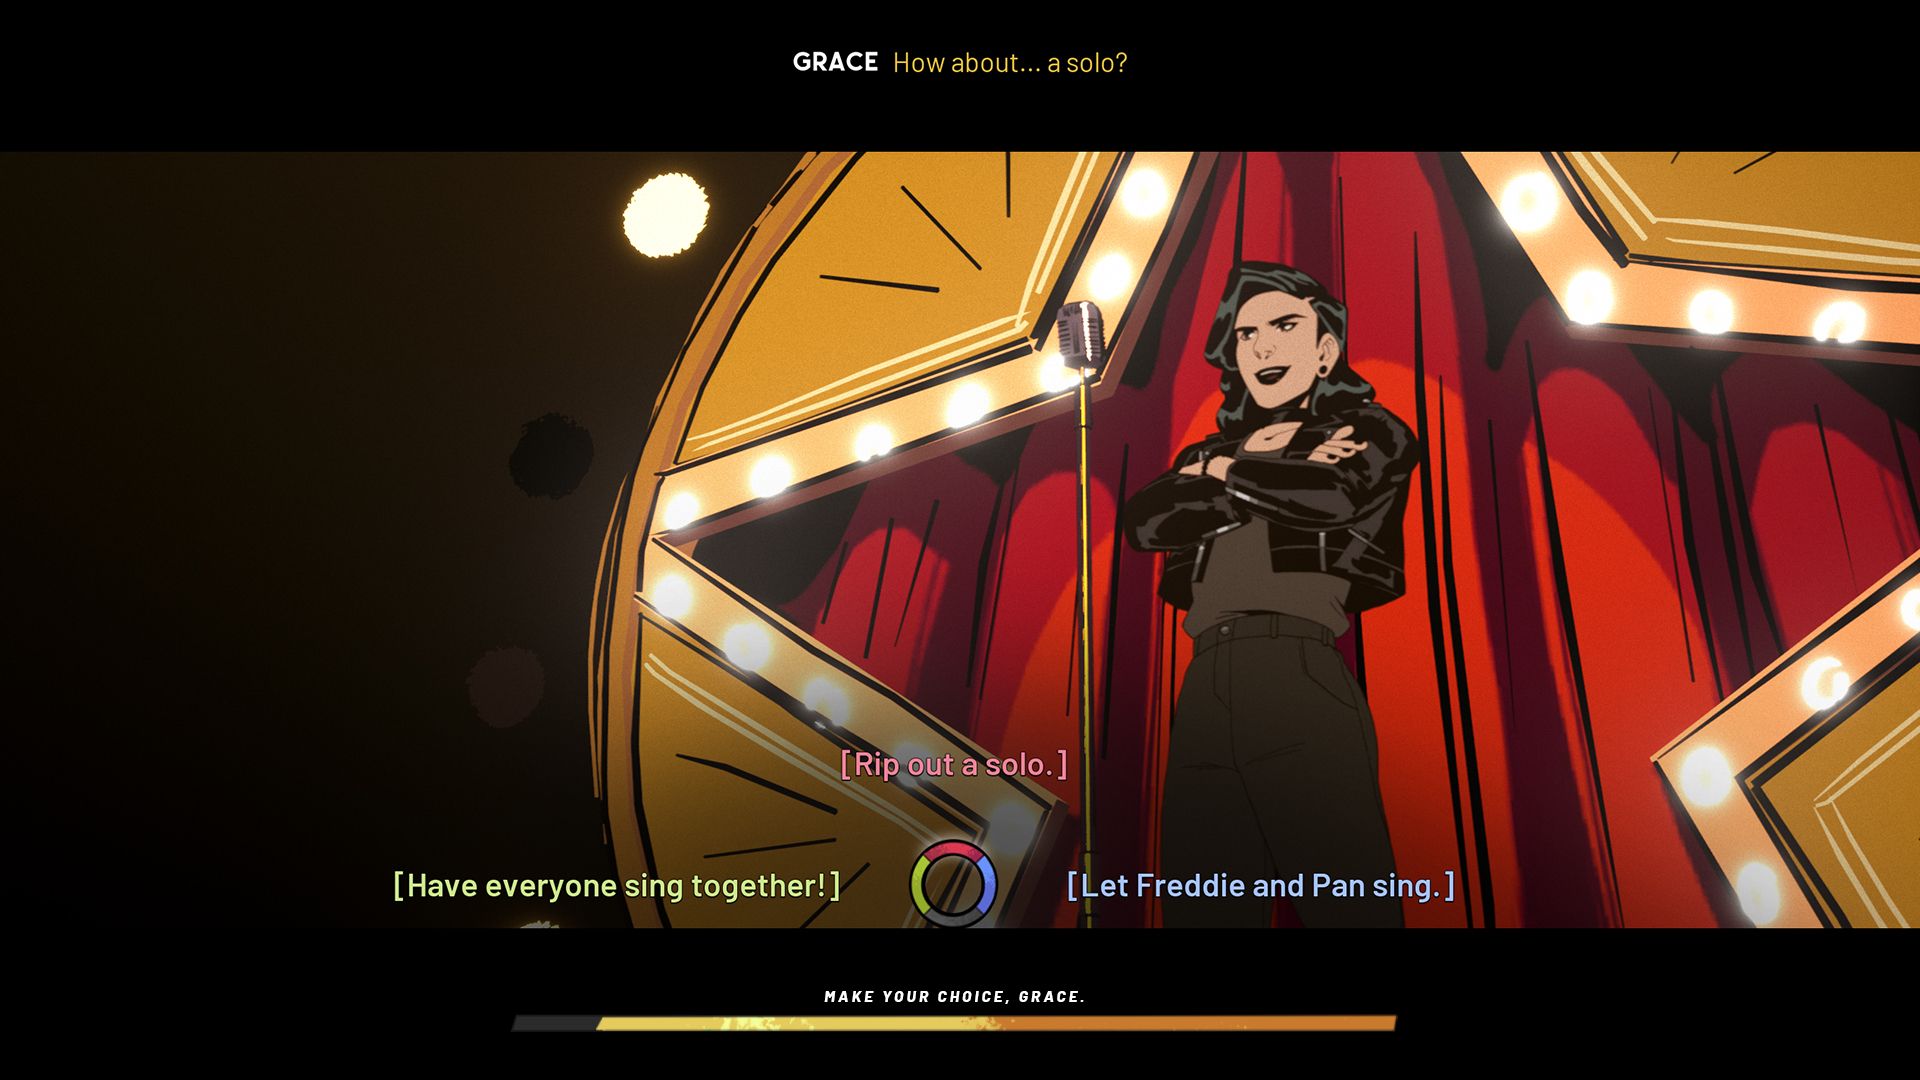 Grace, the protag of Stray Gods is mid-song in front of a large star shape with a red curtain behind the star. Subtitles say Grace: How about....a solo? with three dialogue options for Grace with a meter showing how much time is left to make a choice.